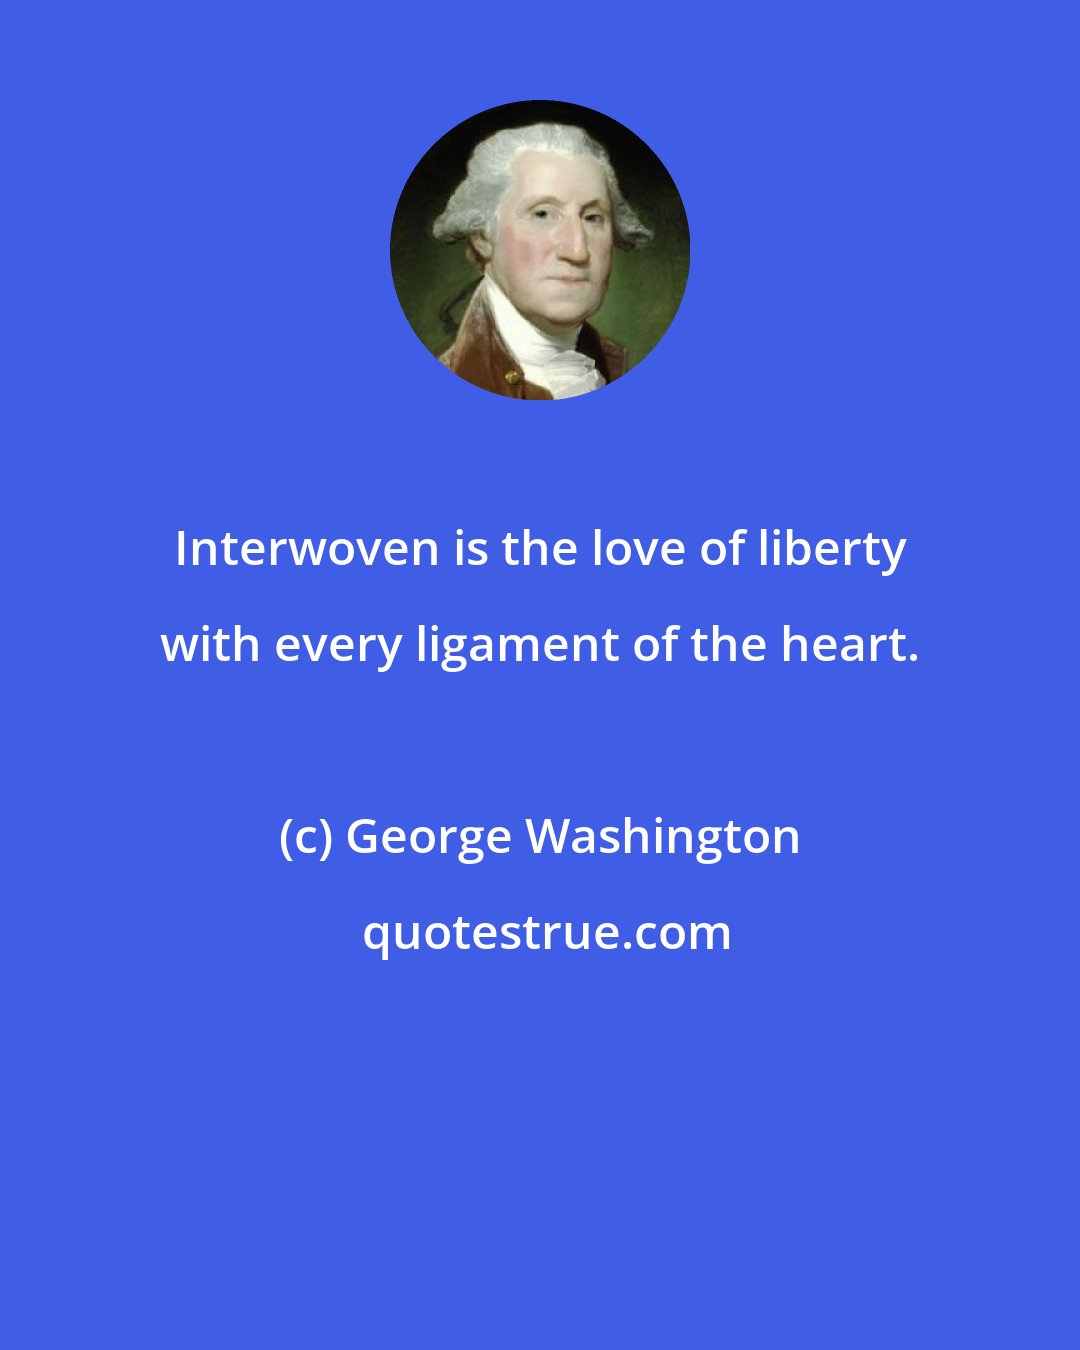 George Washington: Interwoven is the love of liberty with every ligament of the heart.